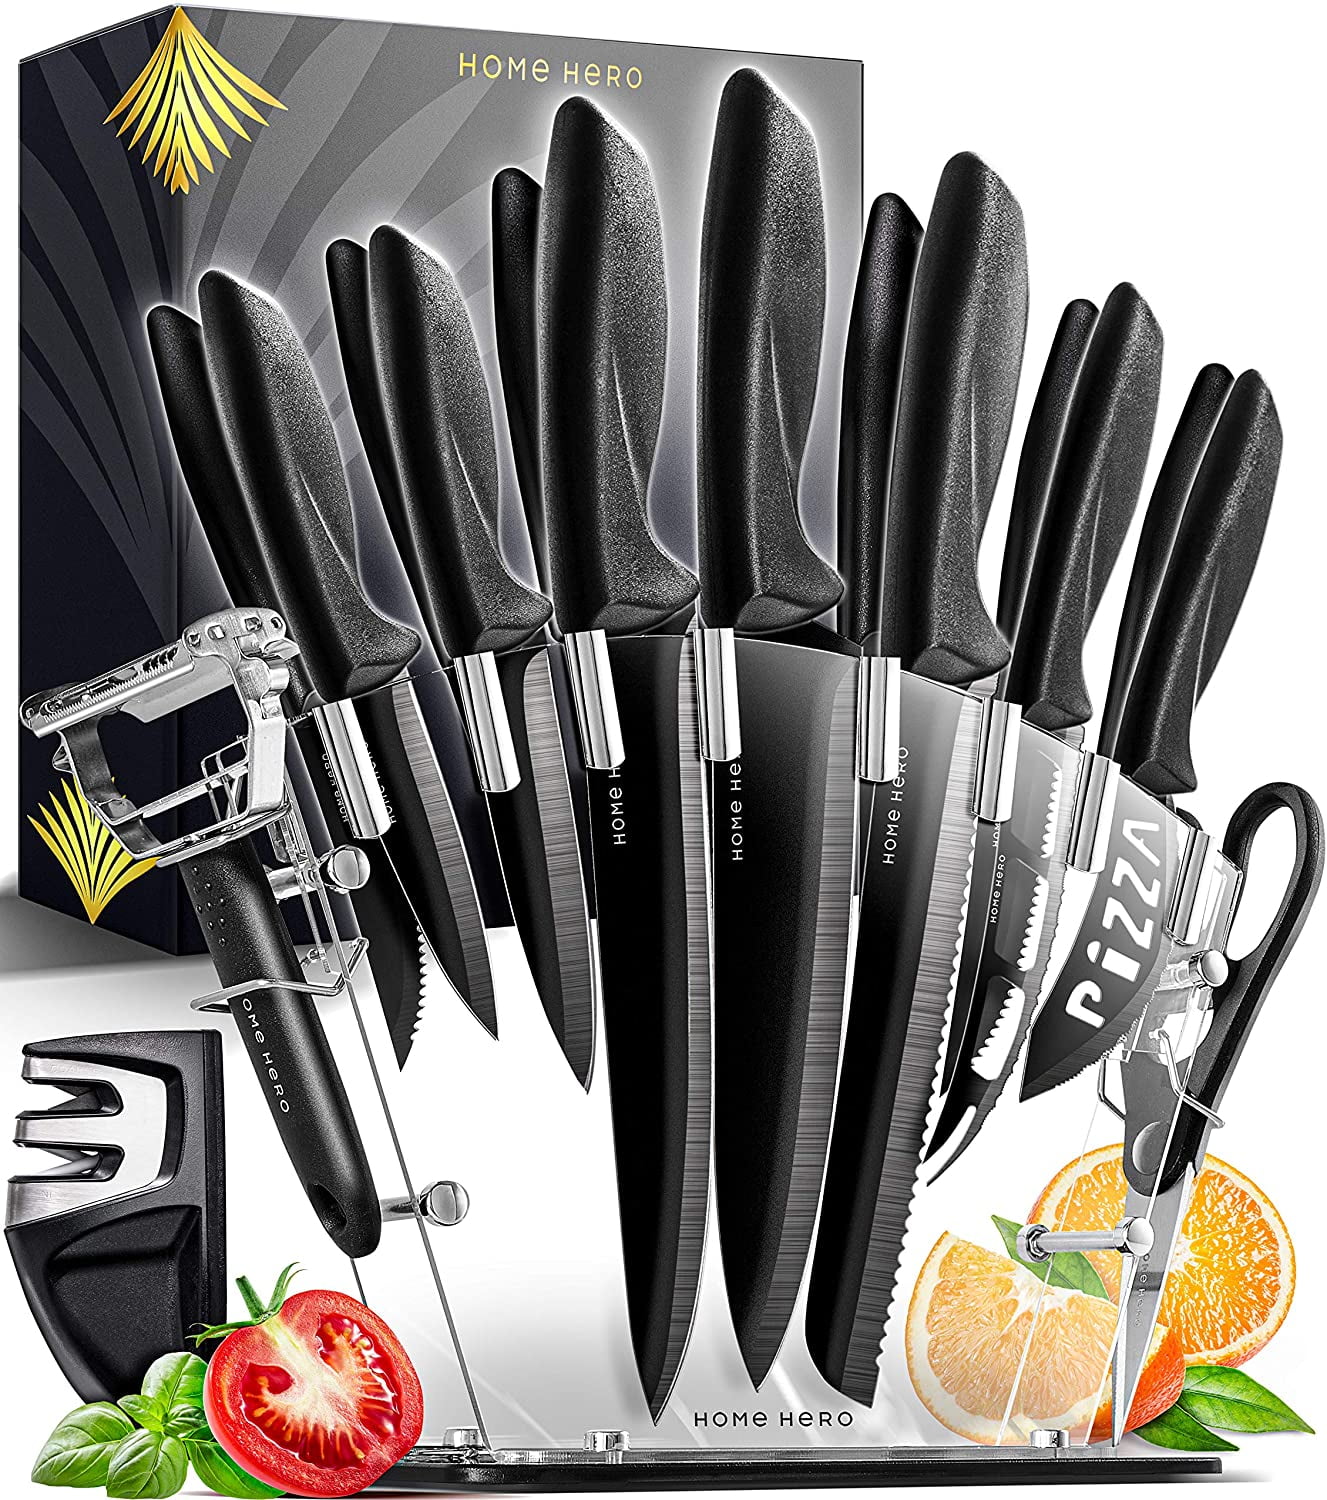 Home Hero 25 Pieces Kitchen Knives Set, 25 Stainless Steel Knives ...